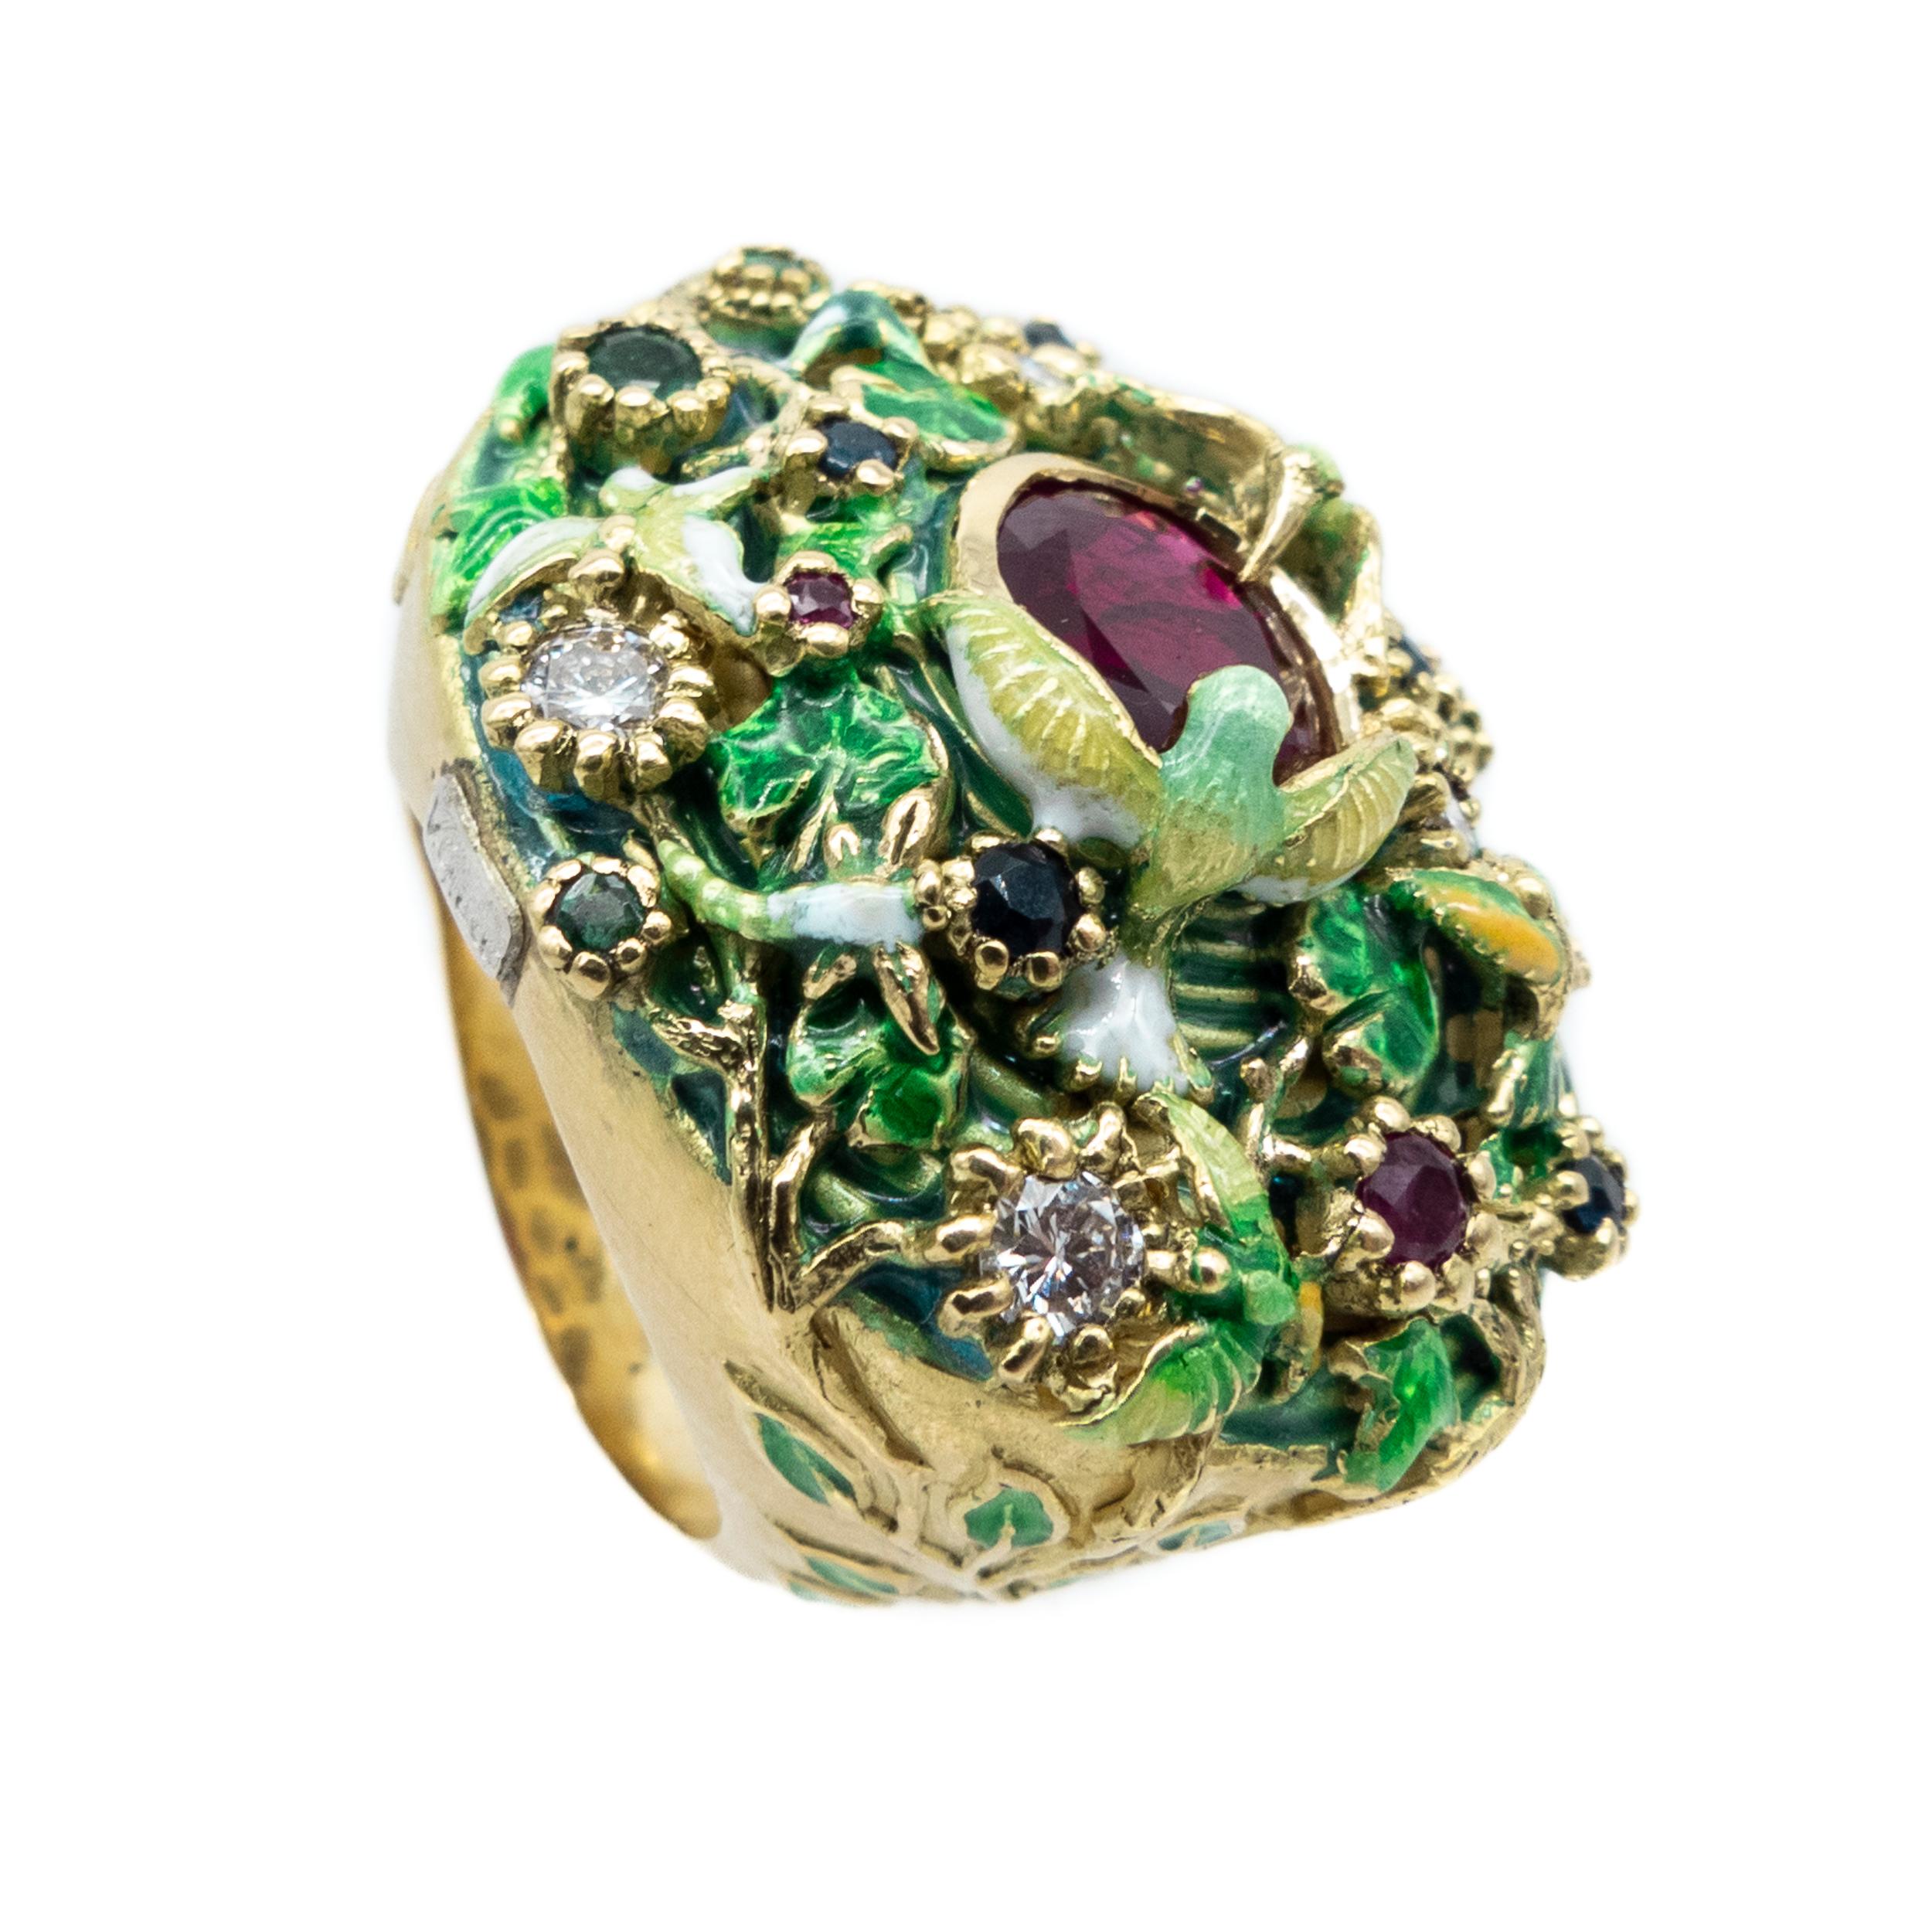 Yellow Gold Ring Enamels Central Ruby Diamonds Sapphires Emeralds Rubies Birds


Introducing our stunning 18-karat yellow gold ring, a magnificent masterpiece from our esteemed Fountain of Life collection. This exquisite piece encapsulates the very